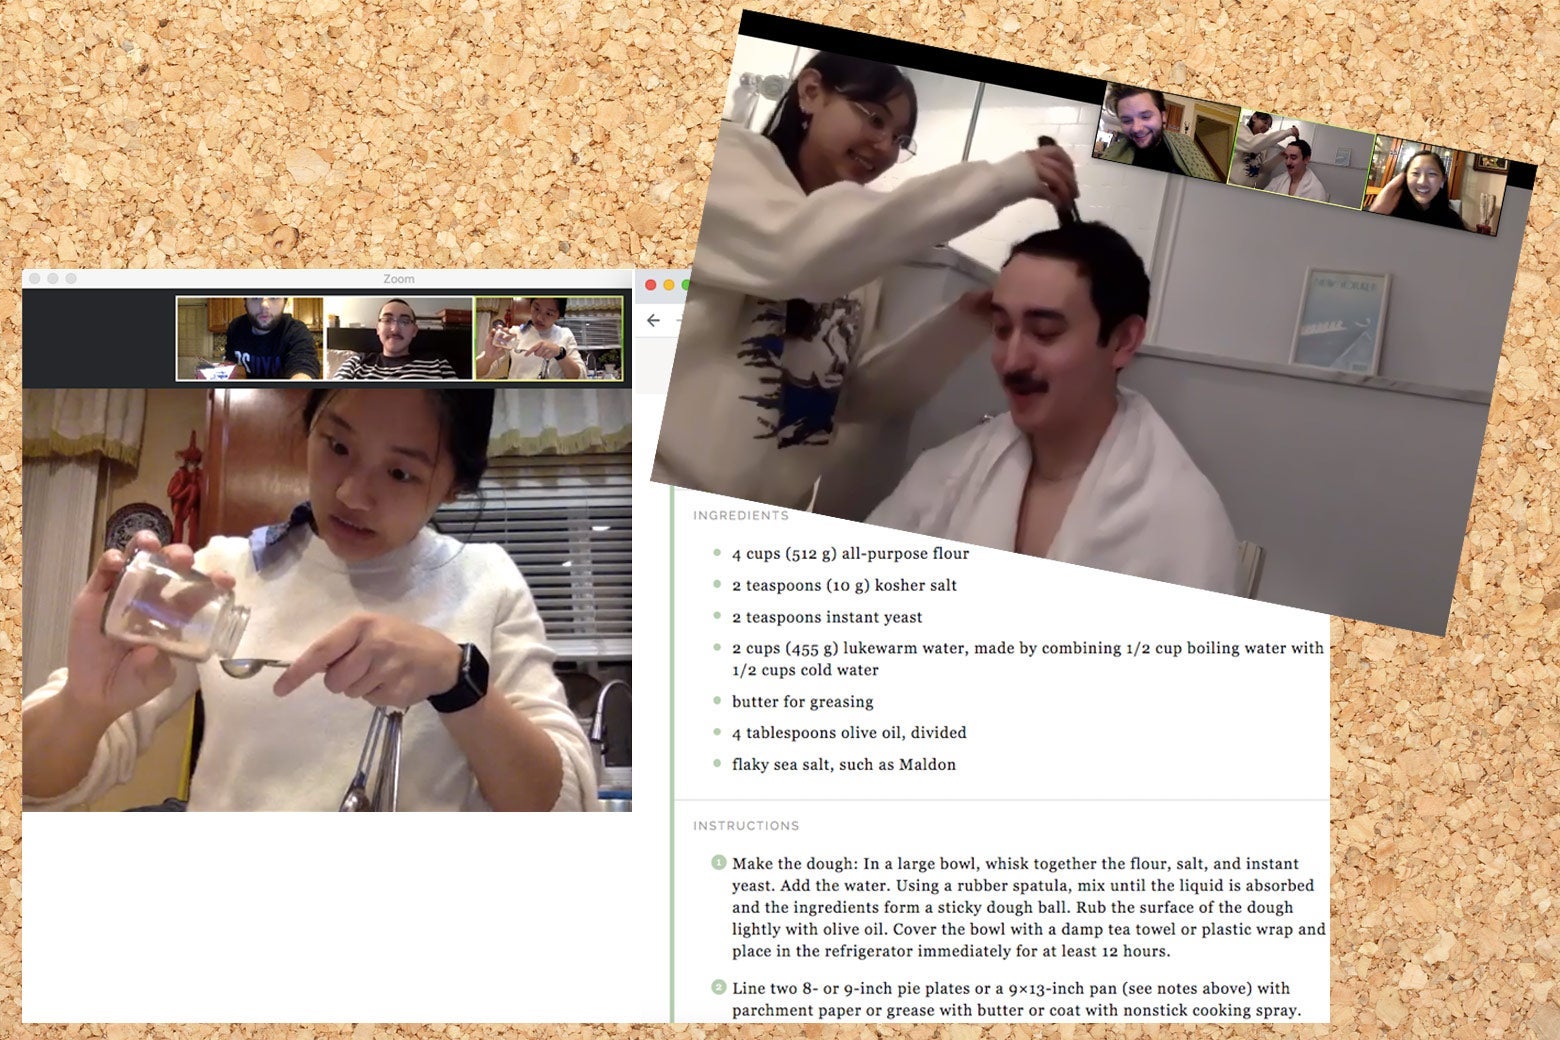 Two Zoom screengrabs, one of a girl cooking and another of a guy getting a haircut. 